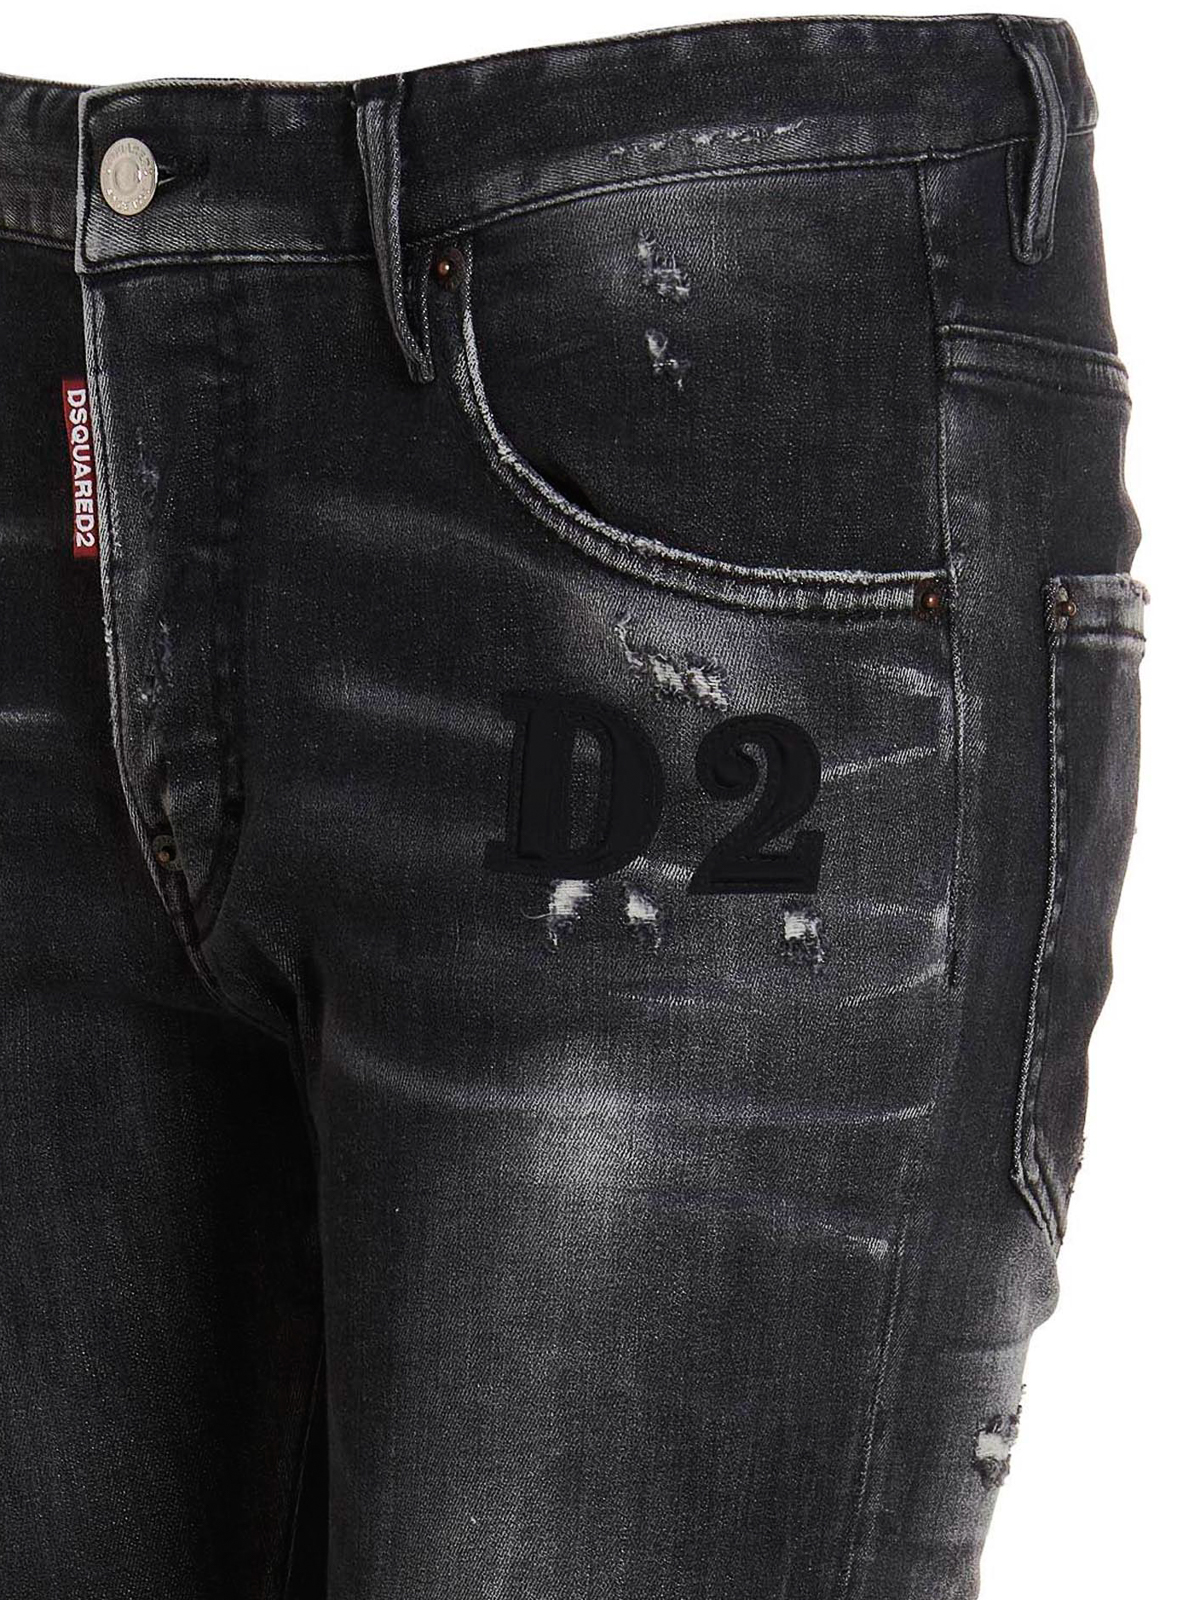 Skinny jeans Dsquared2 - Super twinky jeans - S74LB1181S30503900